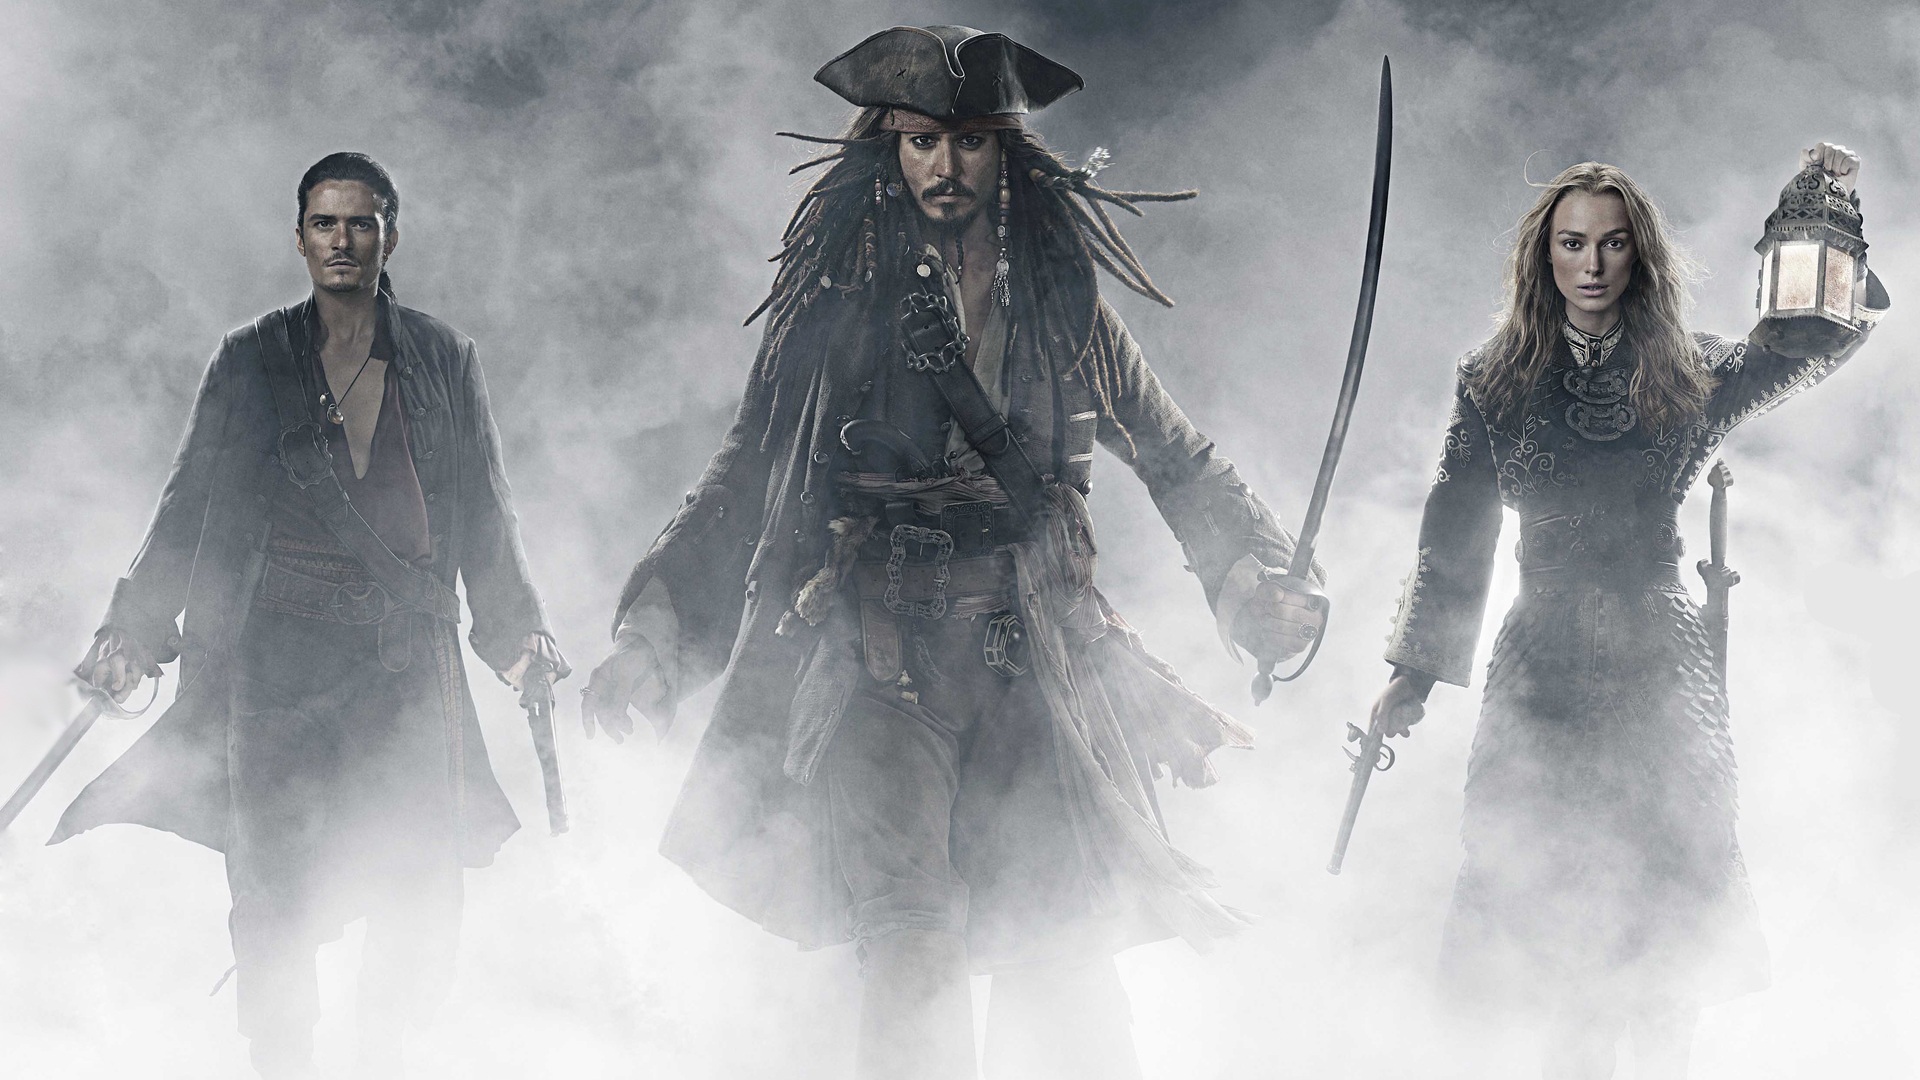 pirates of the caribbean 2 online free movie